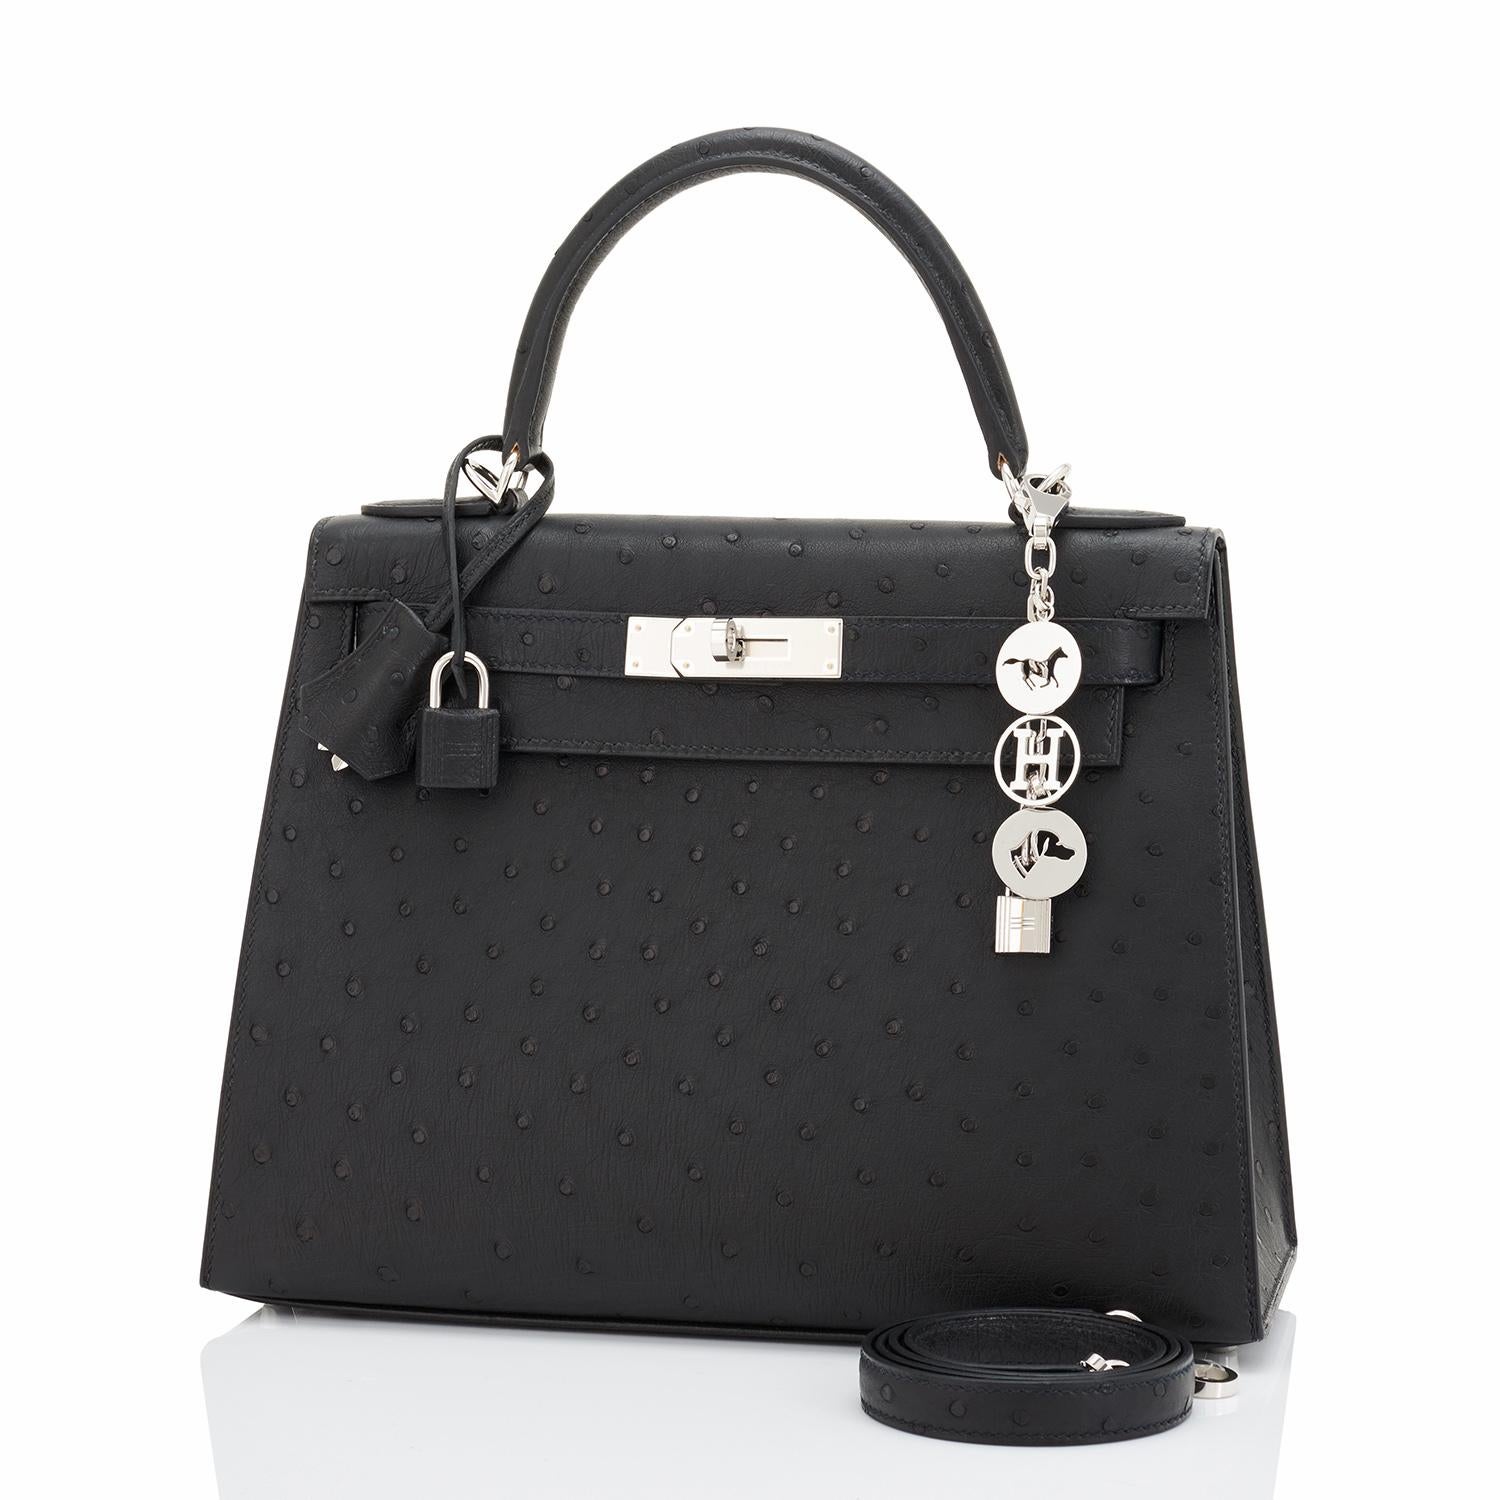 BANK WIRE PRICE ONLY!
Hermes Kelly 28cm Black Ostrich Sellier Shoulder Bag Z Stamp, 2021
The ultimate lifetime exotic Kelly for the chic and elegant fashionista!
Just purchased from Hermes store; bag bears new interior 2021 Z stamp.
Brand New in